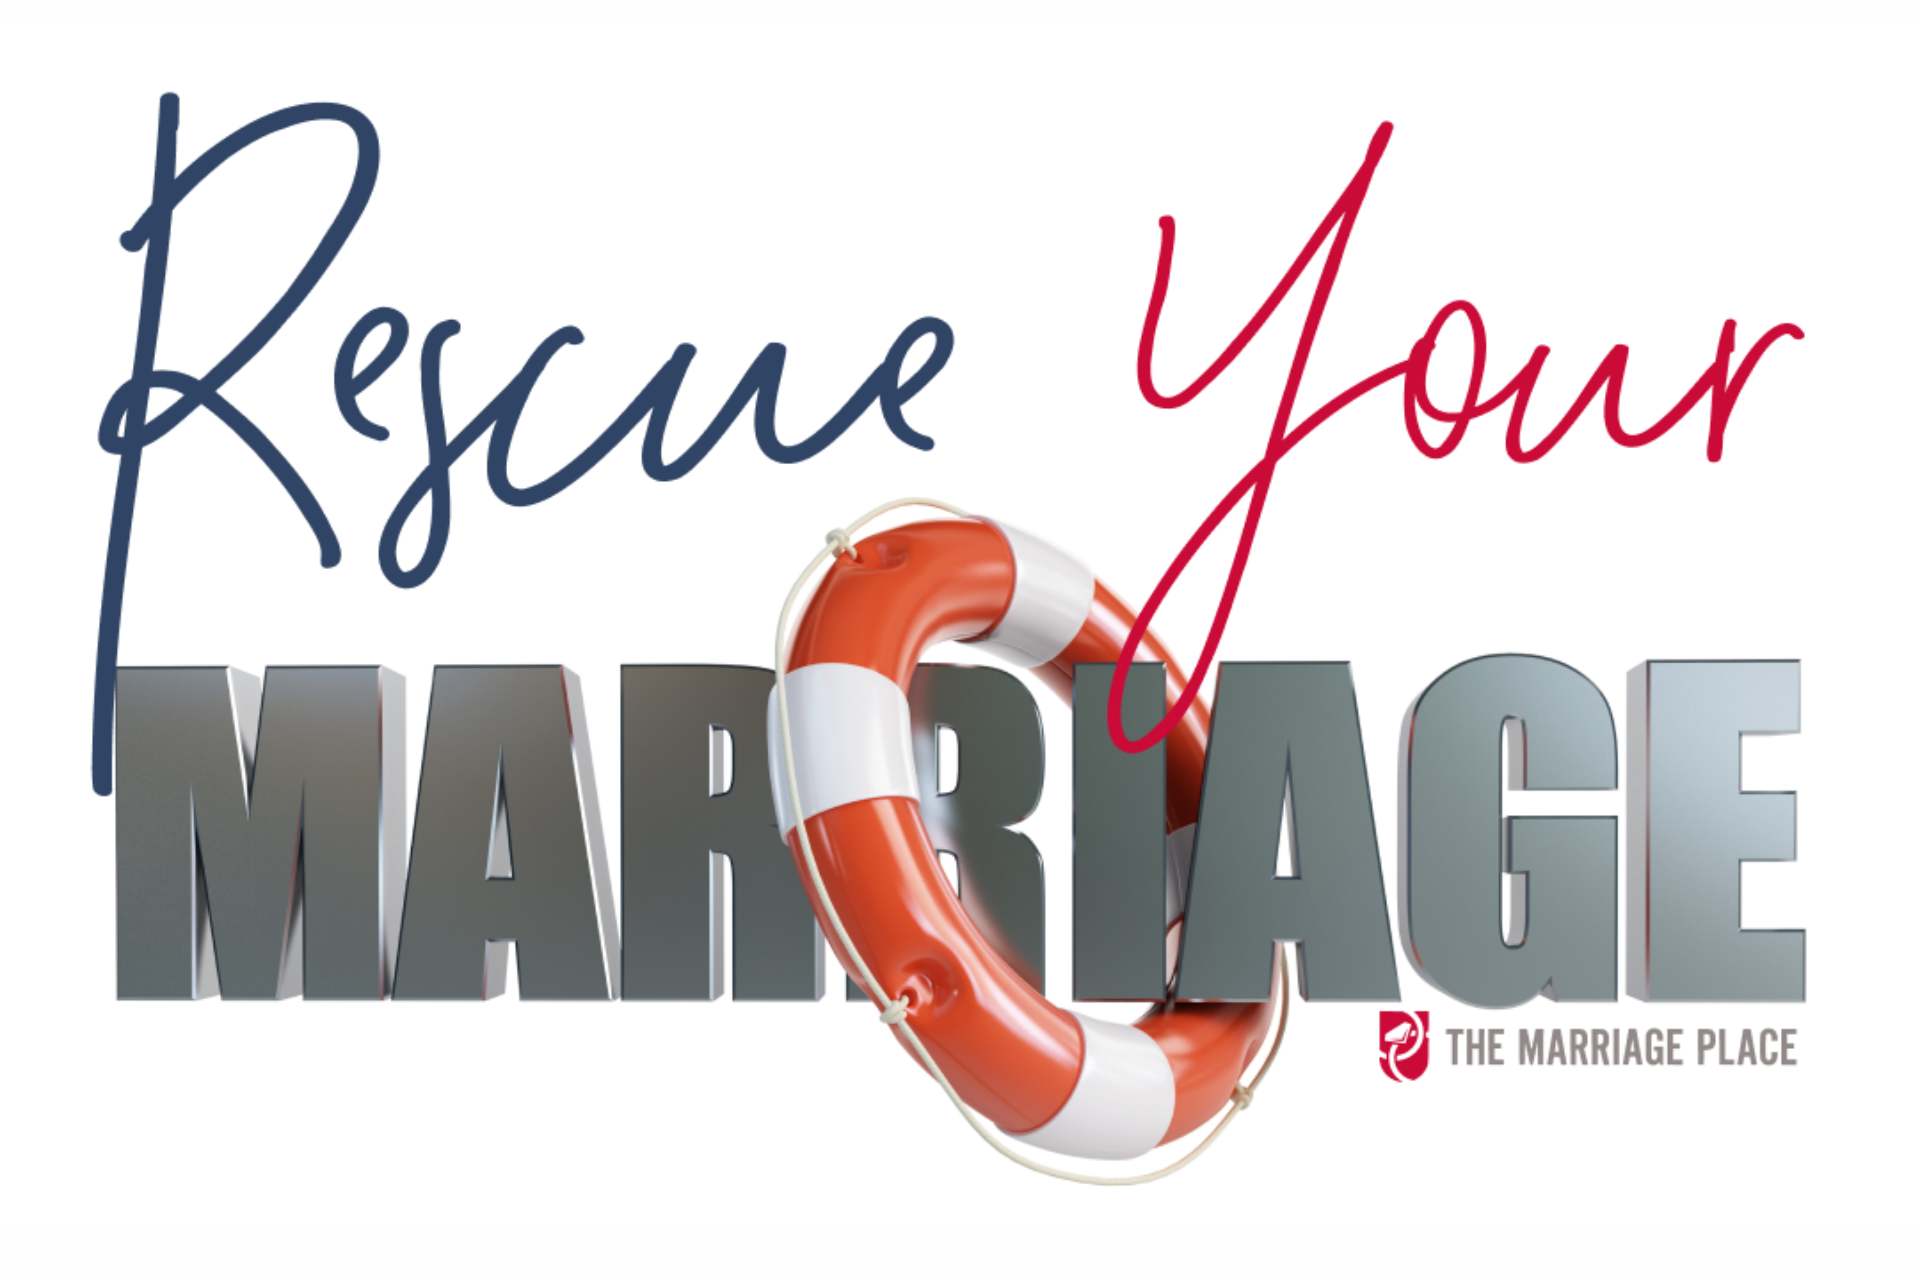 Your Spouse Wants a Divorce - How to Rescue Your Marriage